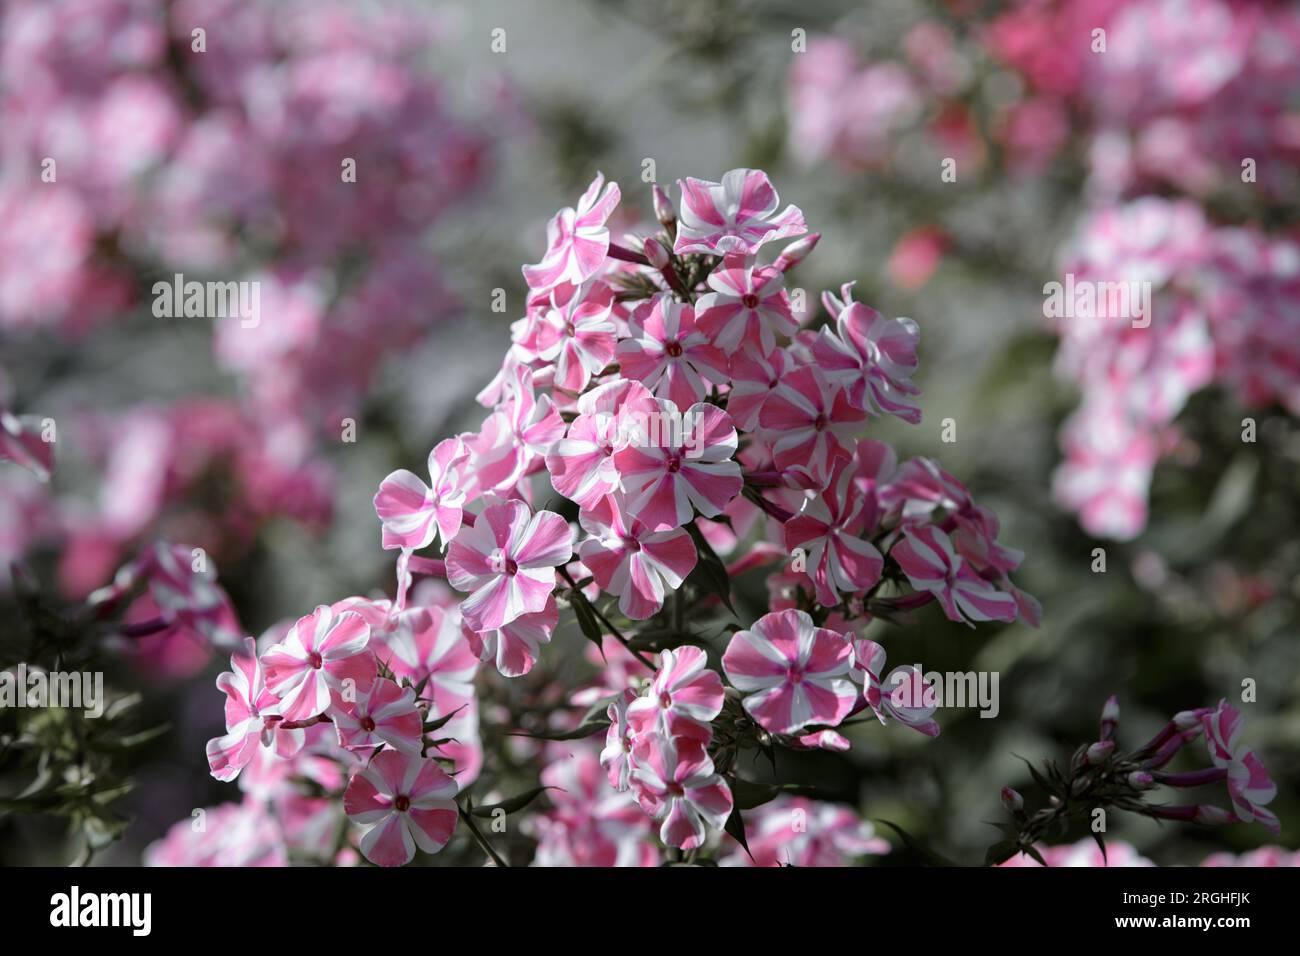 Flowers of phlox paniculata, plant close-up. Beautiful pink phlox flowers in the summer garden Stock Photo